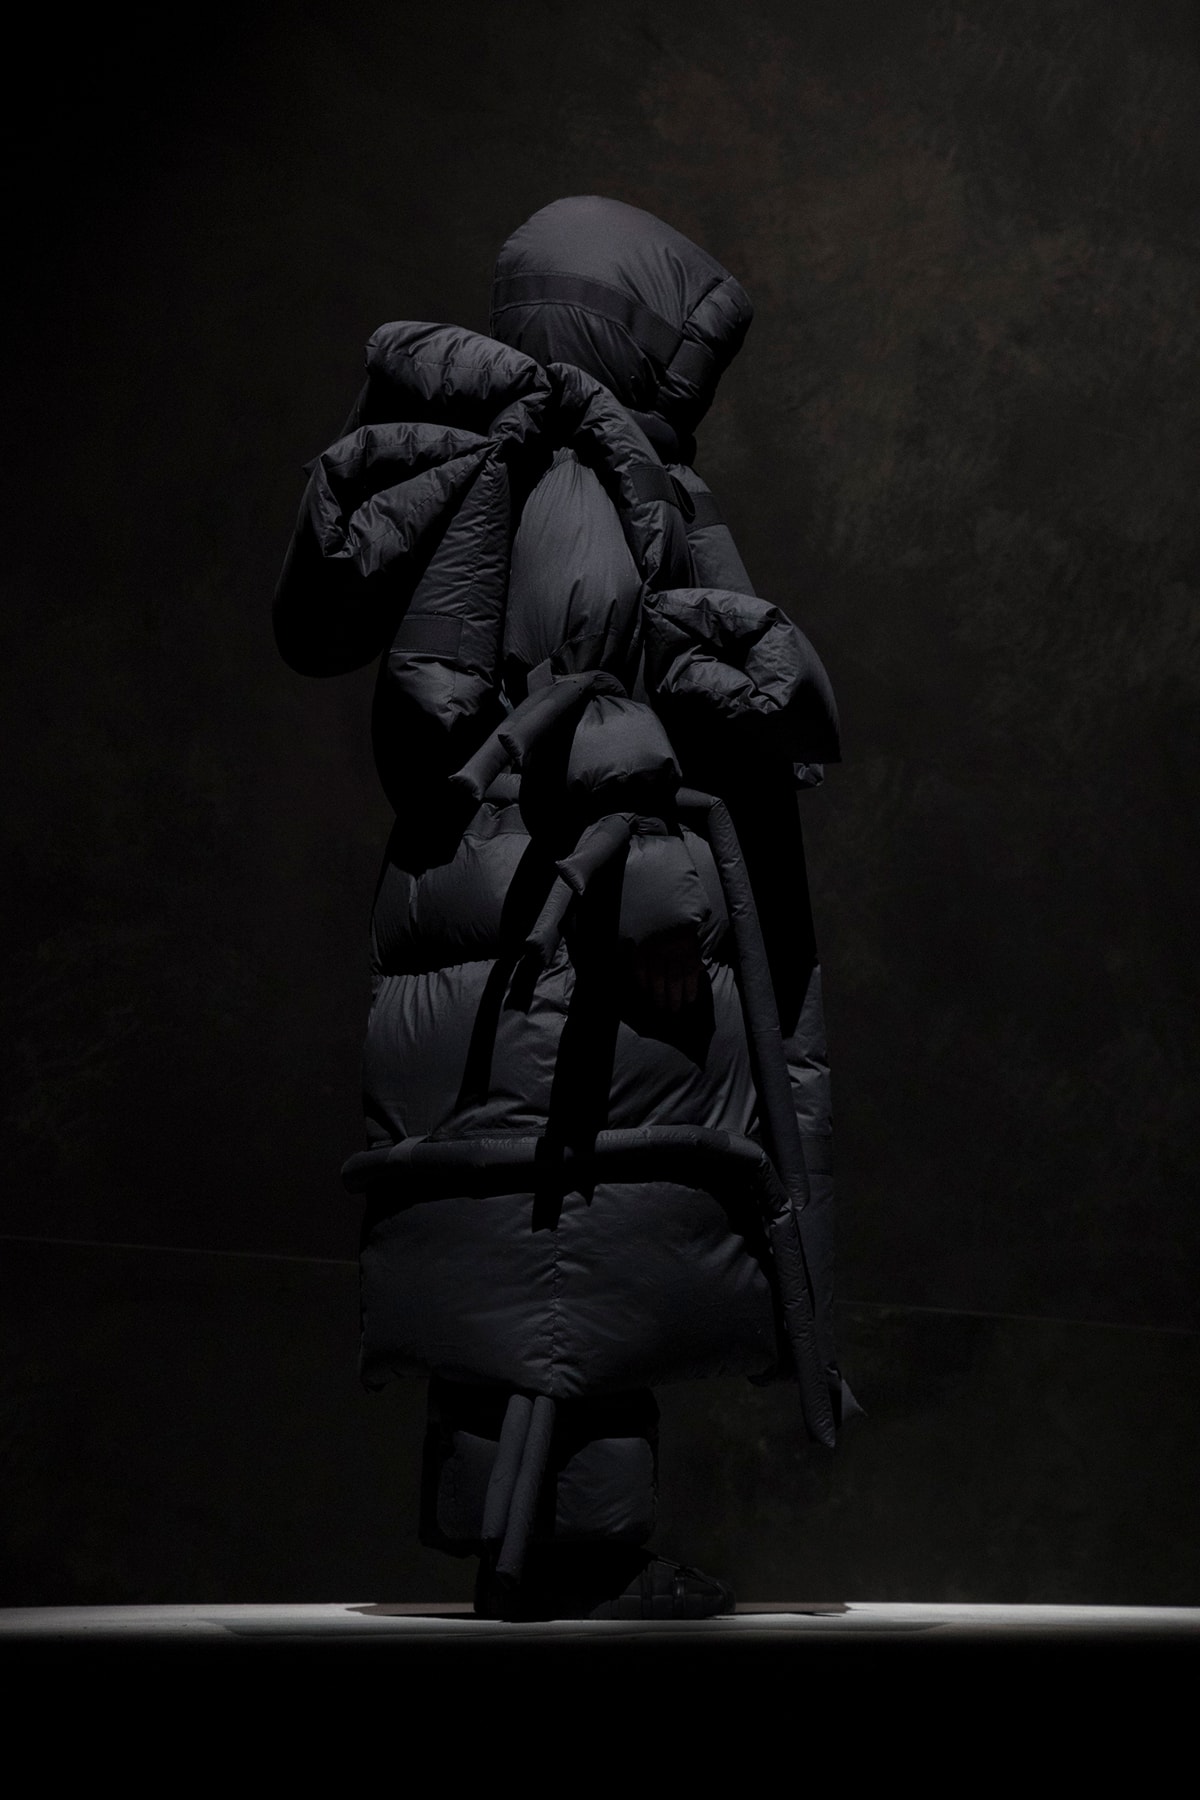 Craig green moncler genius 5 lookbook imagery closer look details release date drop info closer look collaboration collection puffer jacket down